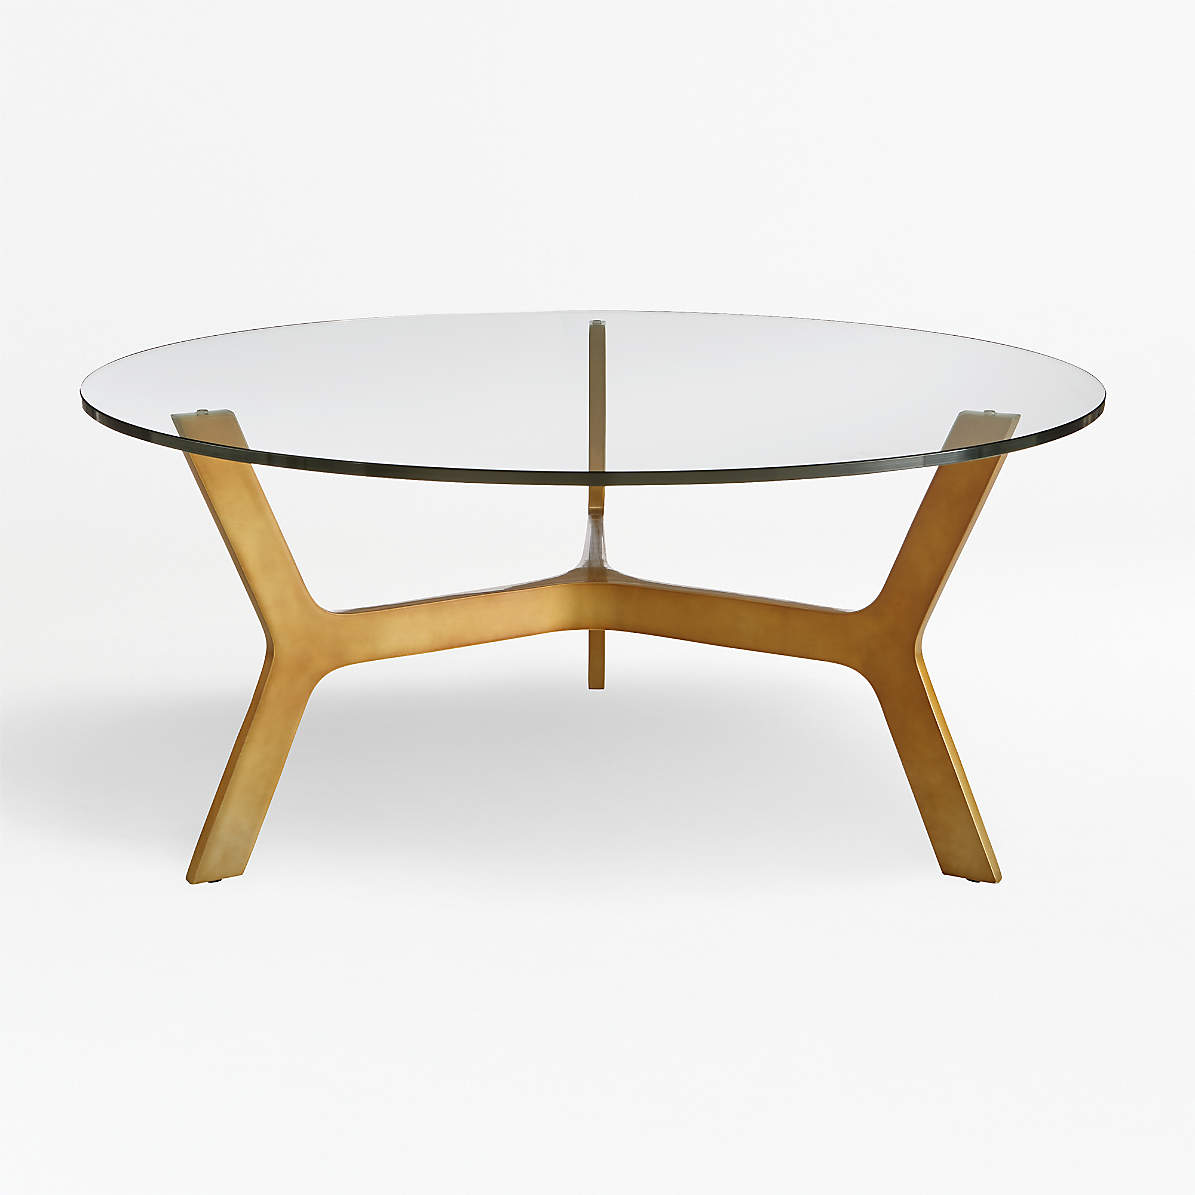 omvatten Stoutmoedig Rot Elke Round Glass Coffee Table with Brass Base + Reviews | Crate & Barrel